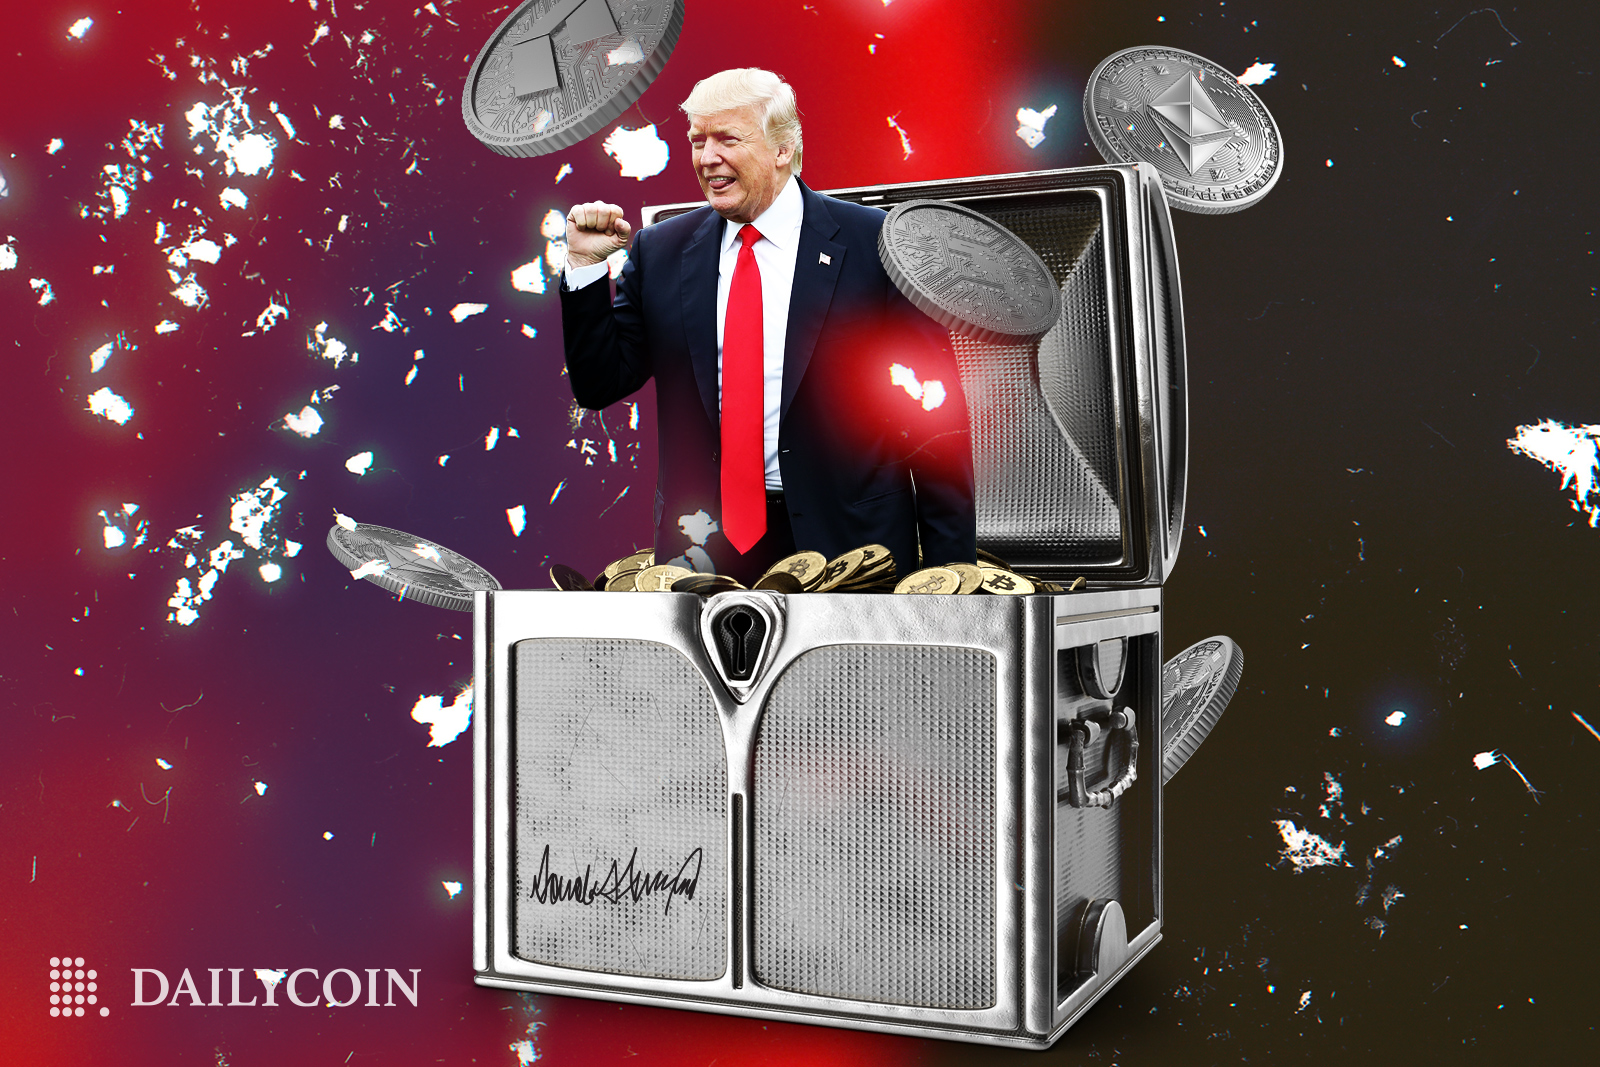 Donald trump hapilly stands inside the metal box full of crypto and coins